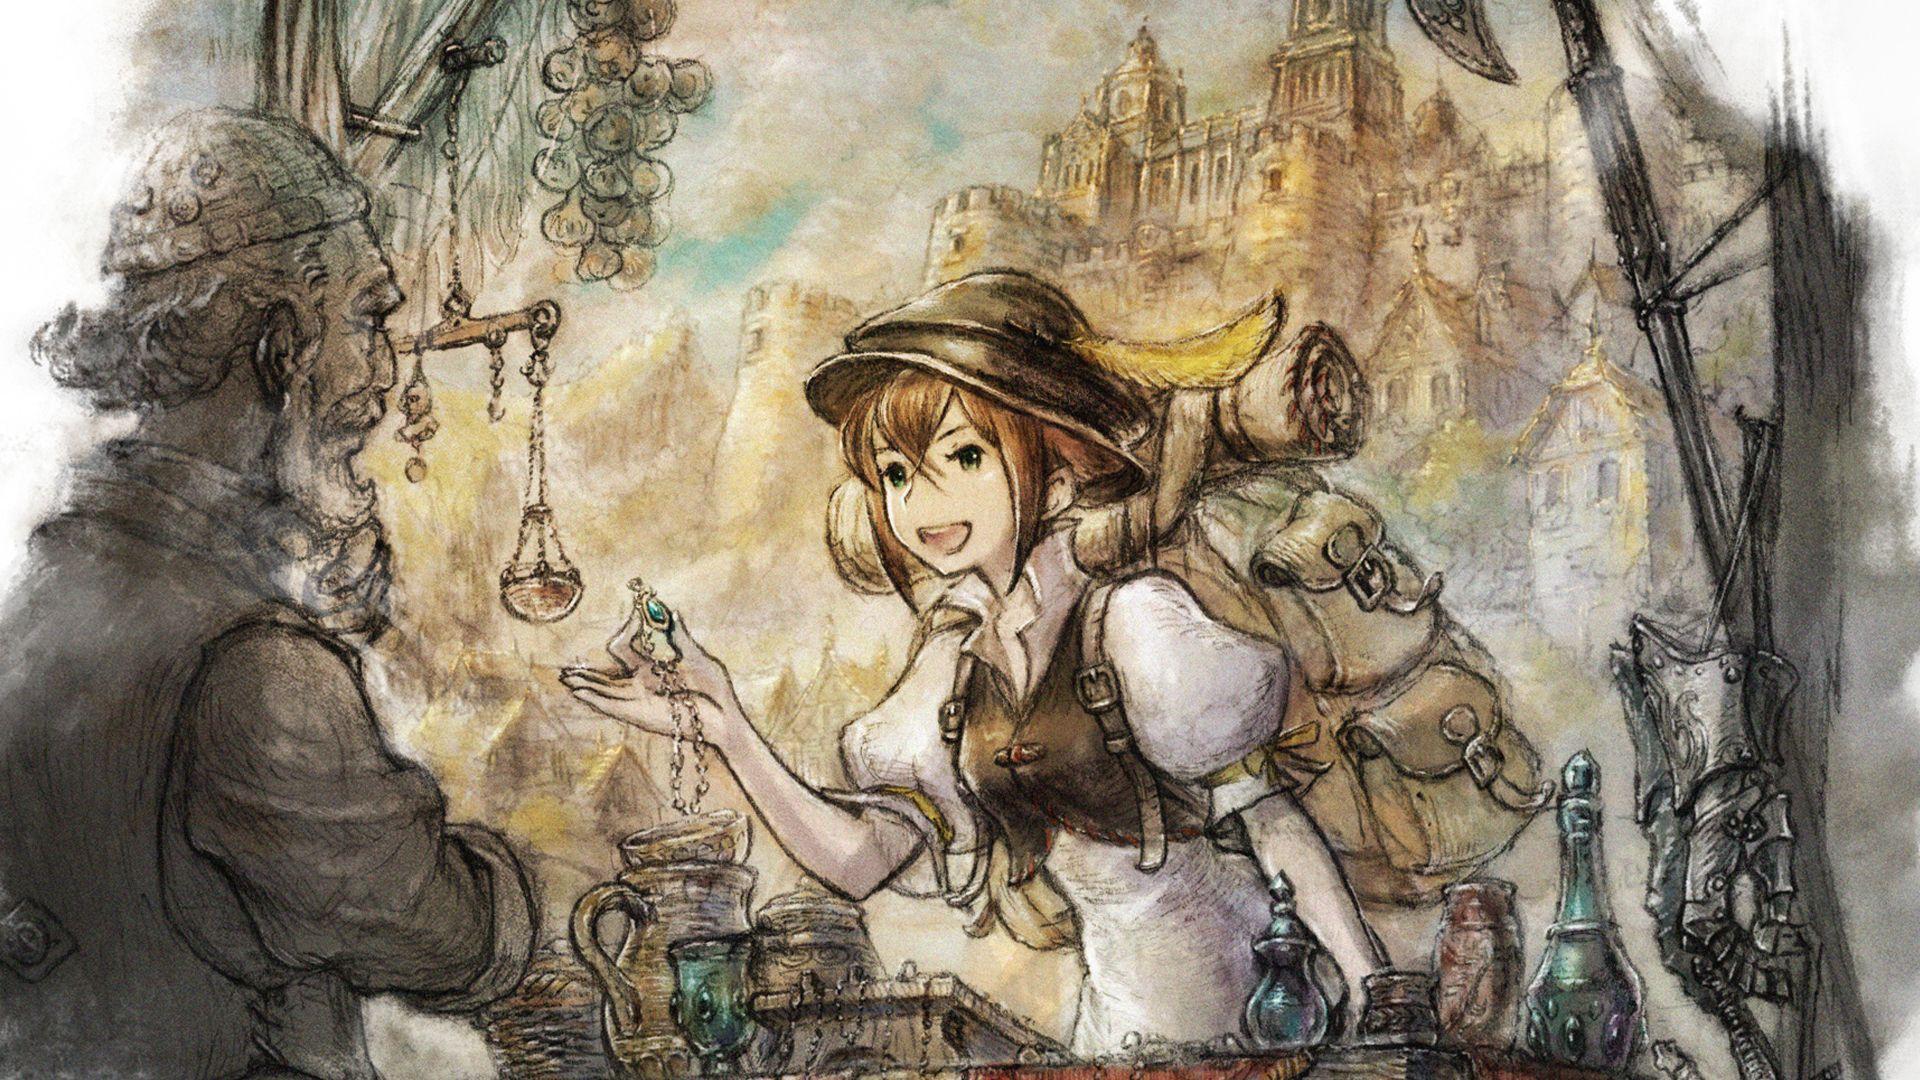 download free octopath